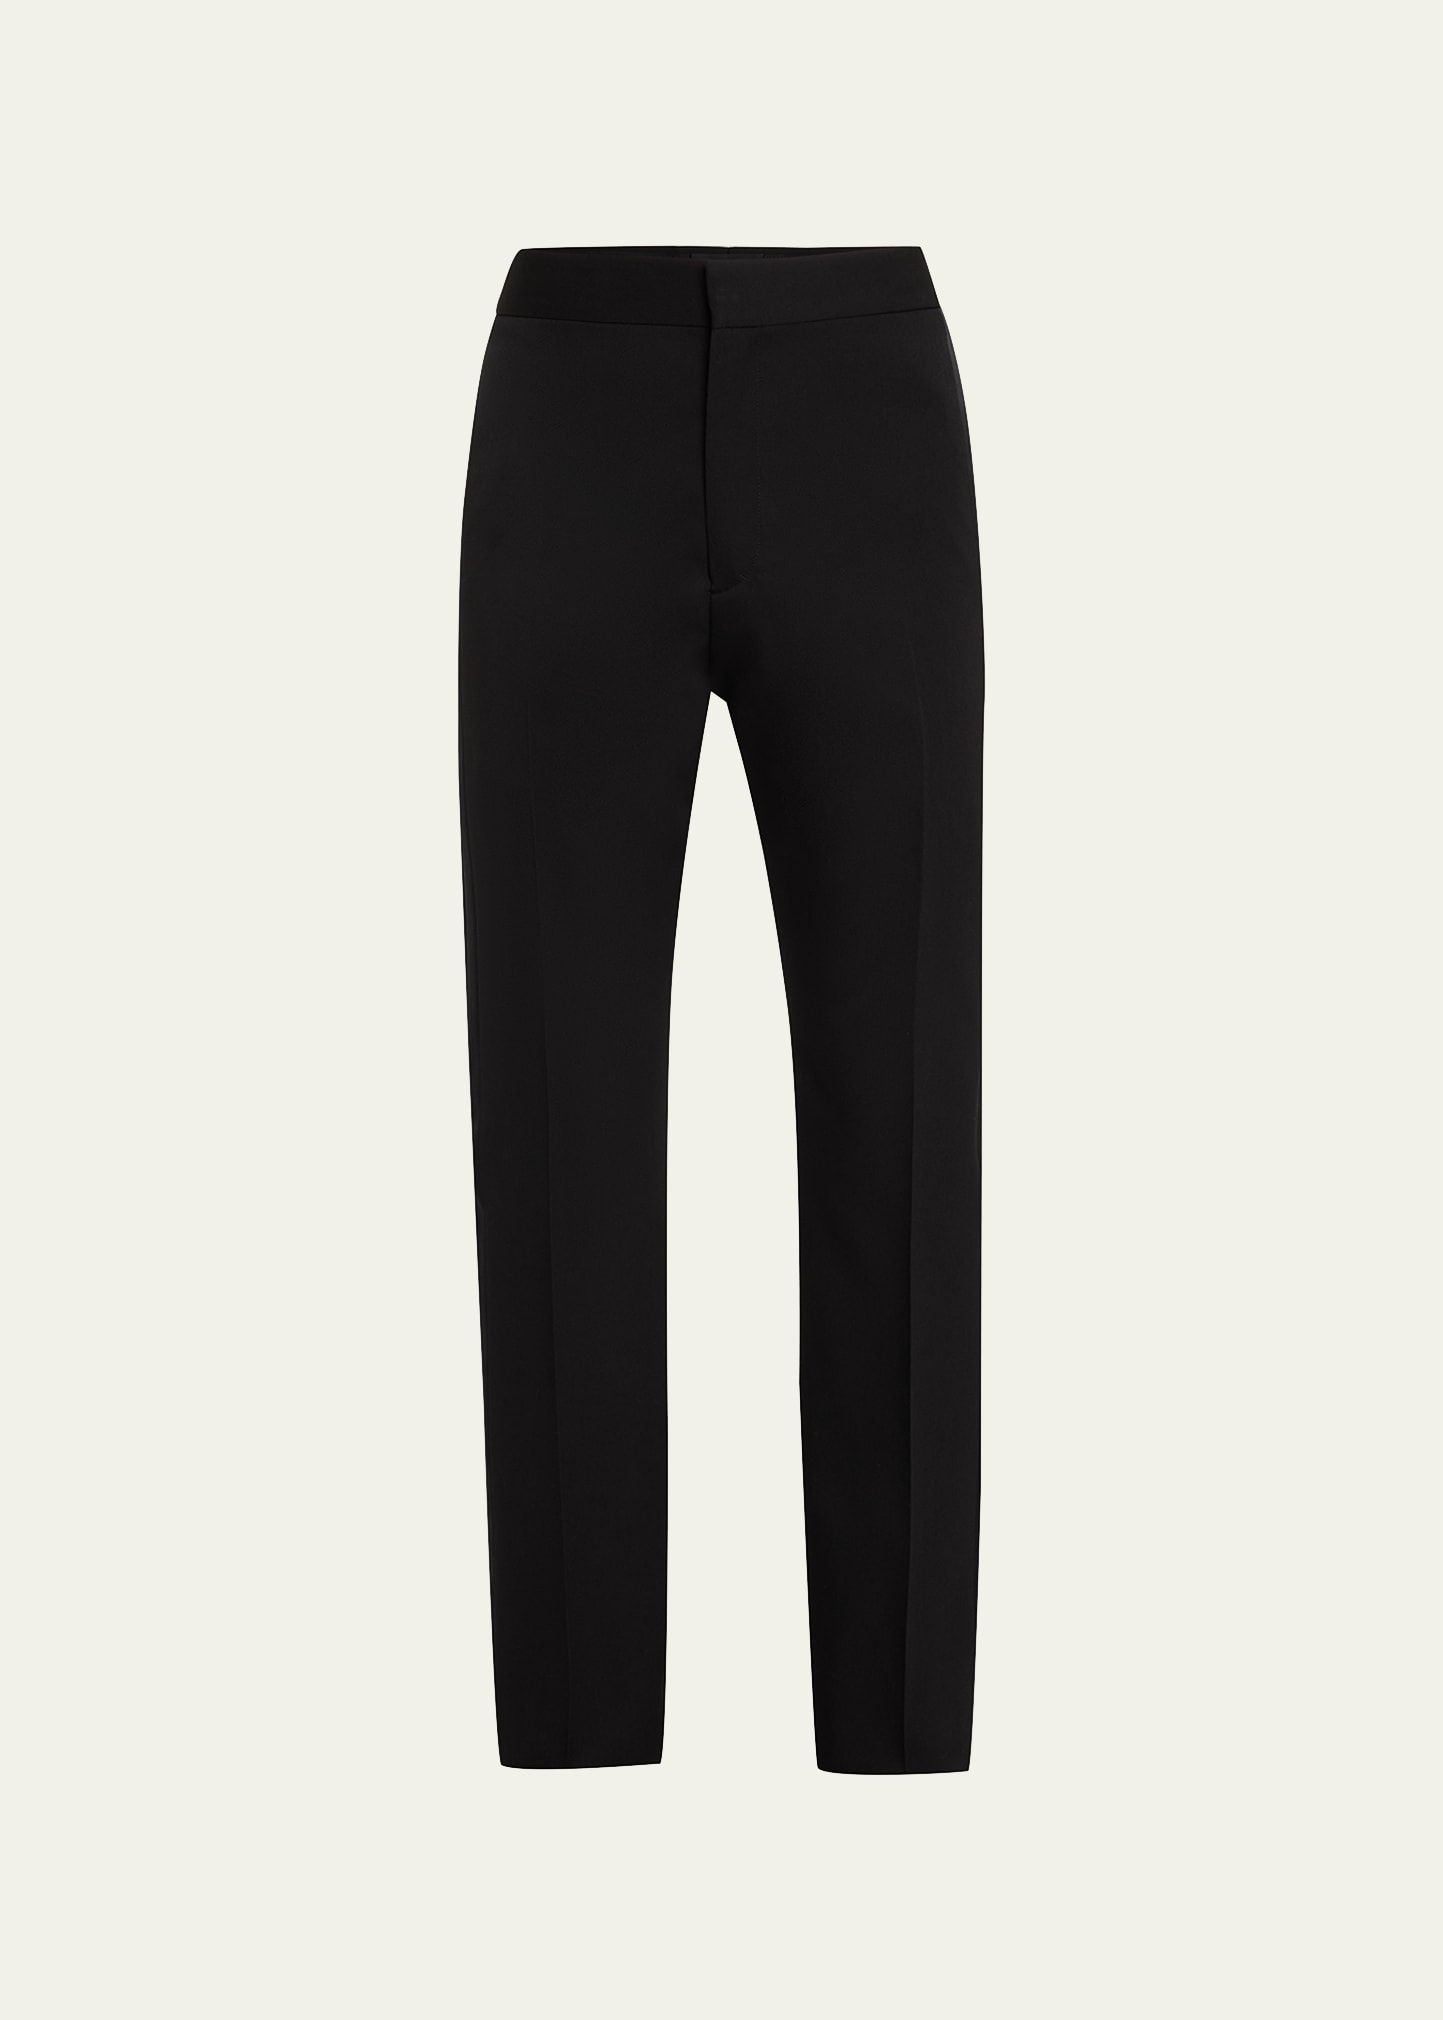 Givenchy Men's Wool Pants With Satin Band Detail In Black